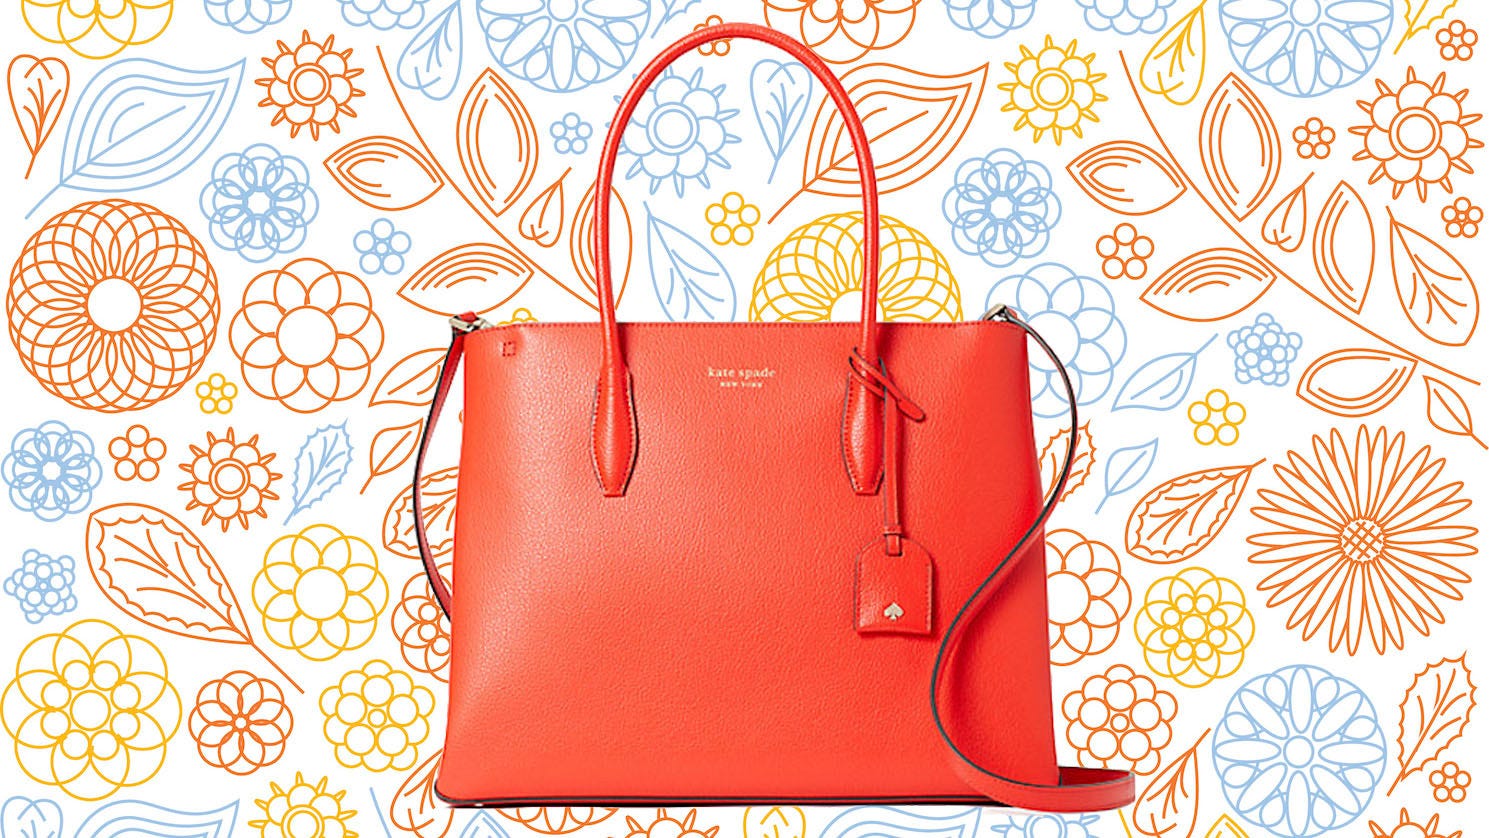 Kate Spade Surprise Sale: Get Kate Spade purses and more at up to 77% off